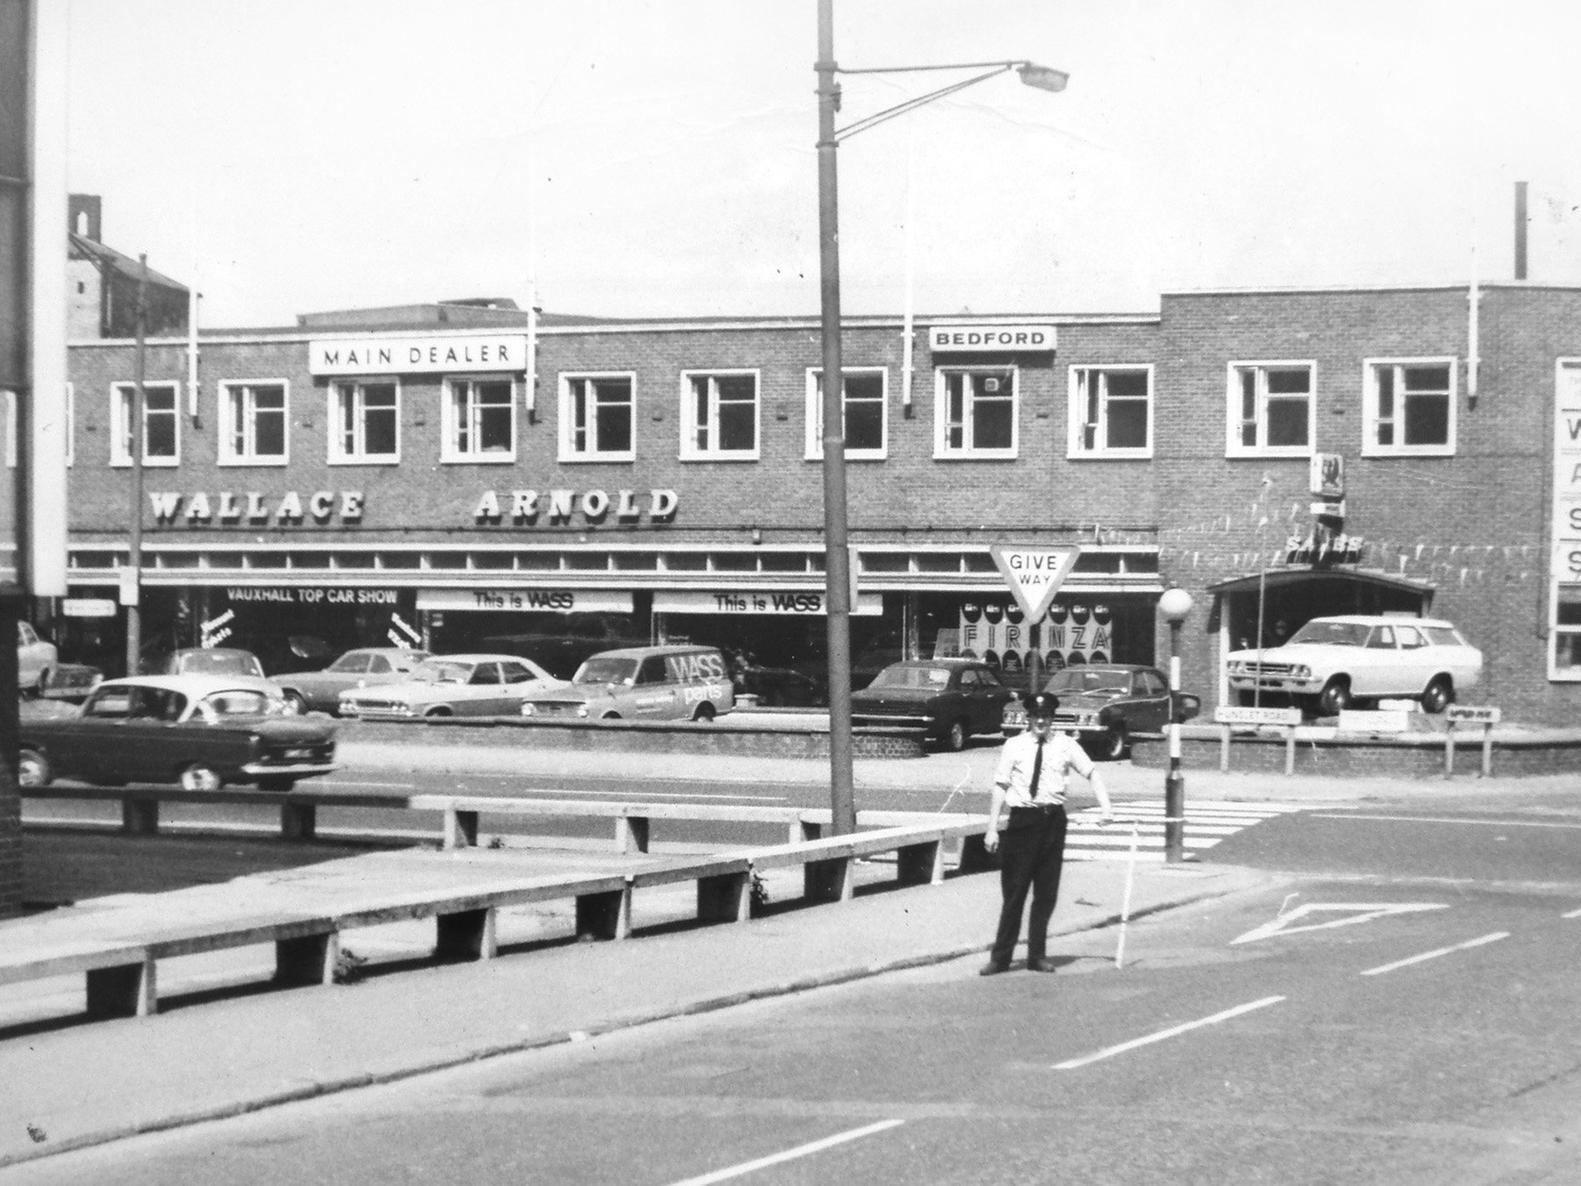 View of Leathley Road looking towards Wallace Arnold Sales & Service.